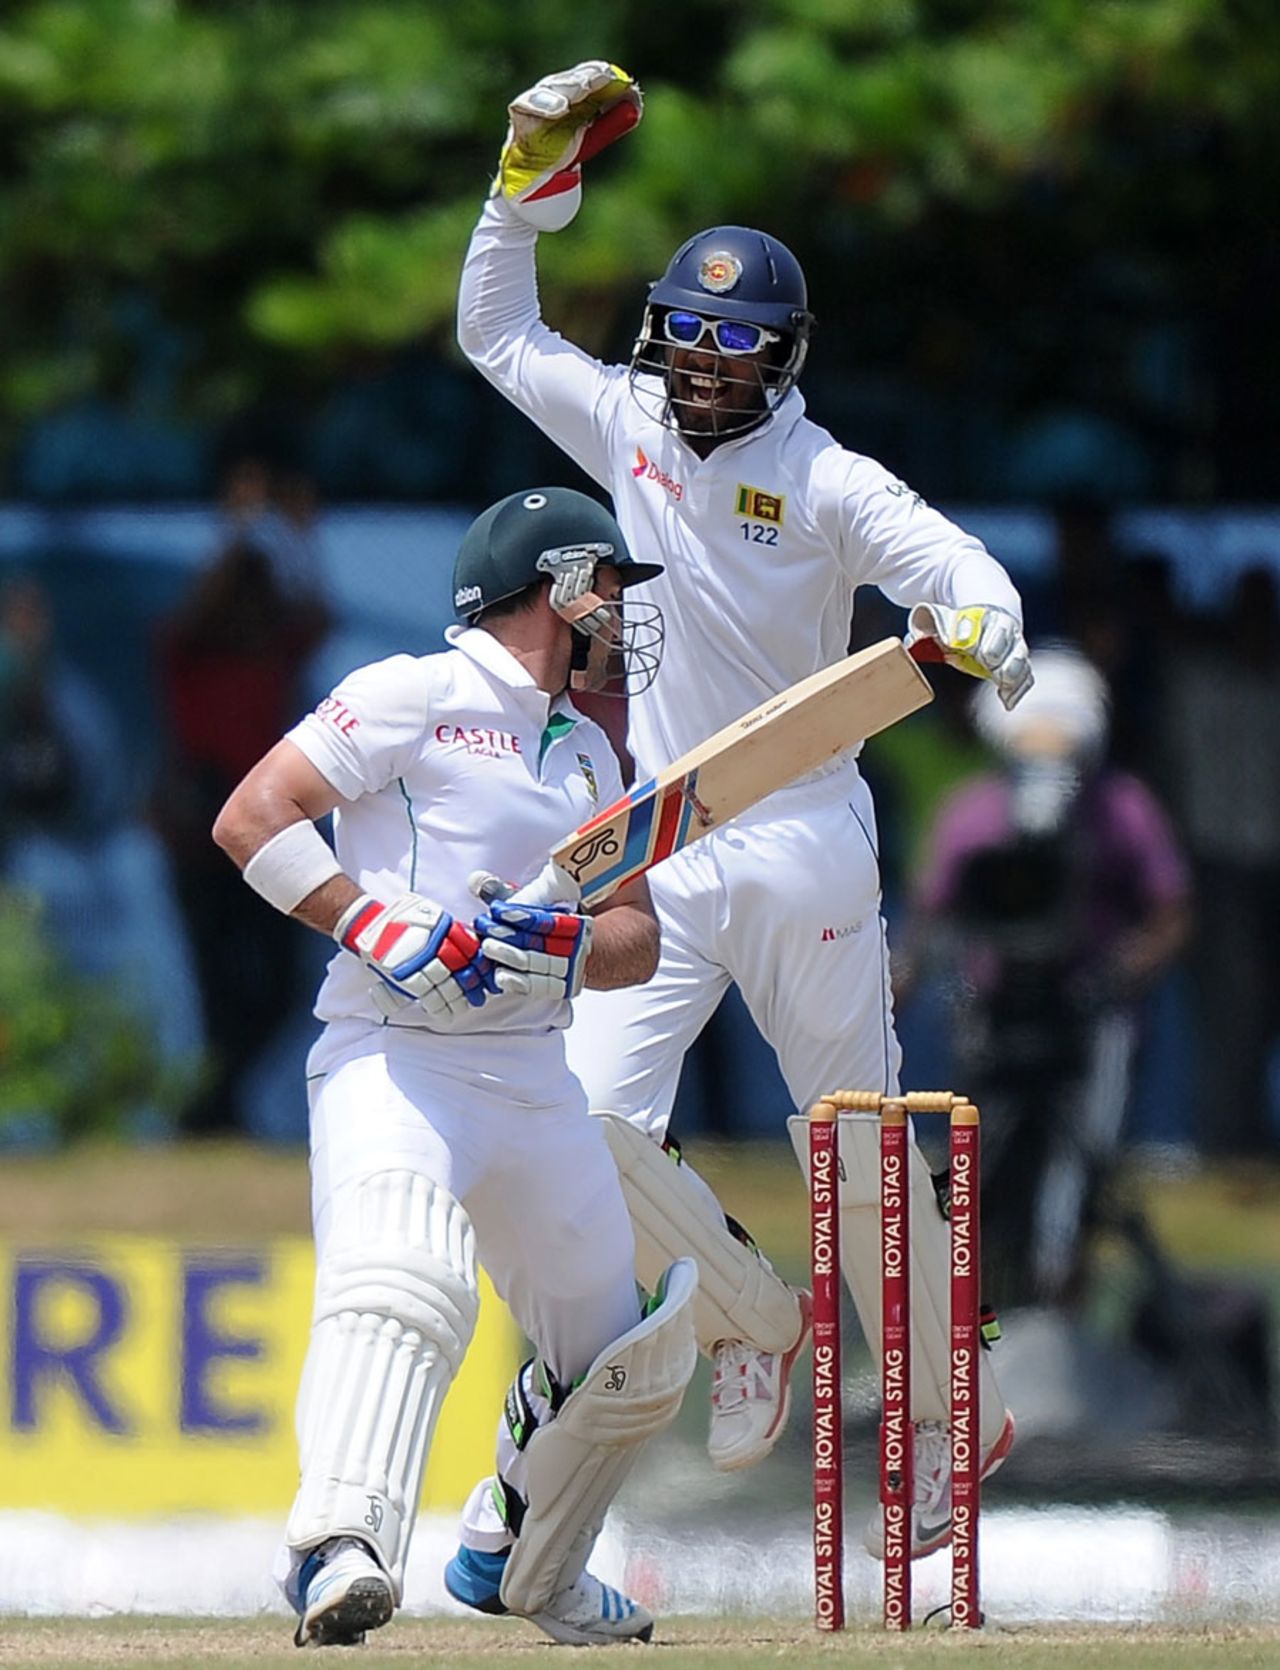 Dinesh Chandimal celebrates after taking a catch off Dean Elgar, Sri Lanka v South Africa, 1st Test, Galle, 4th day, July 19, 2014